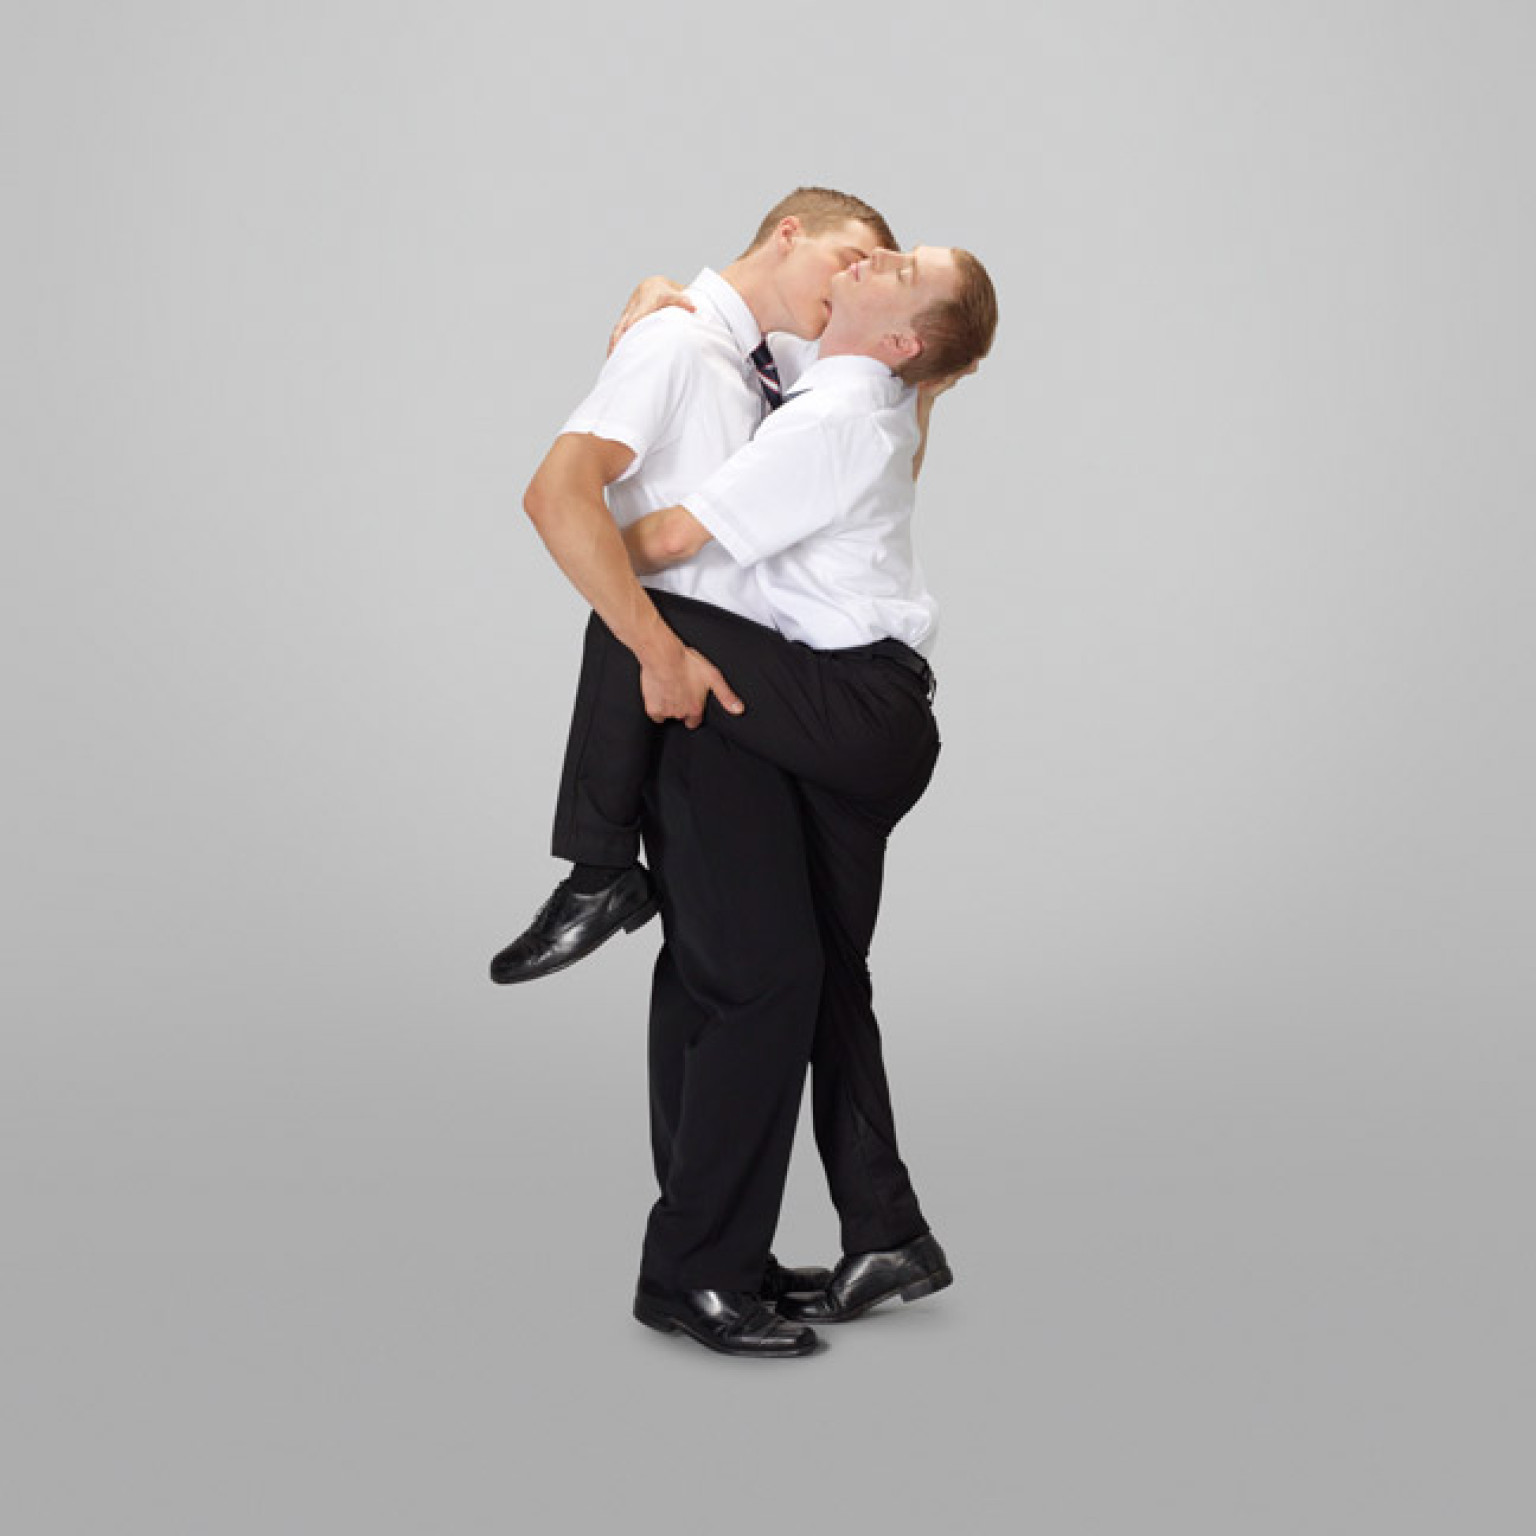 The Book Of Mormon Missionary Positions Shows Forbidden Gay Relations Within The Church